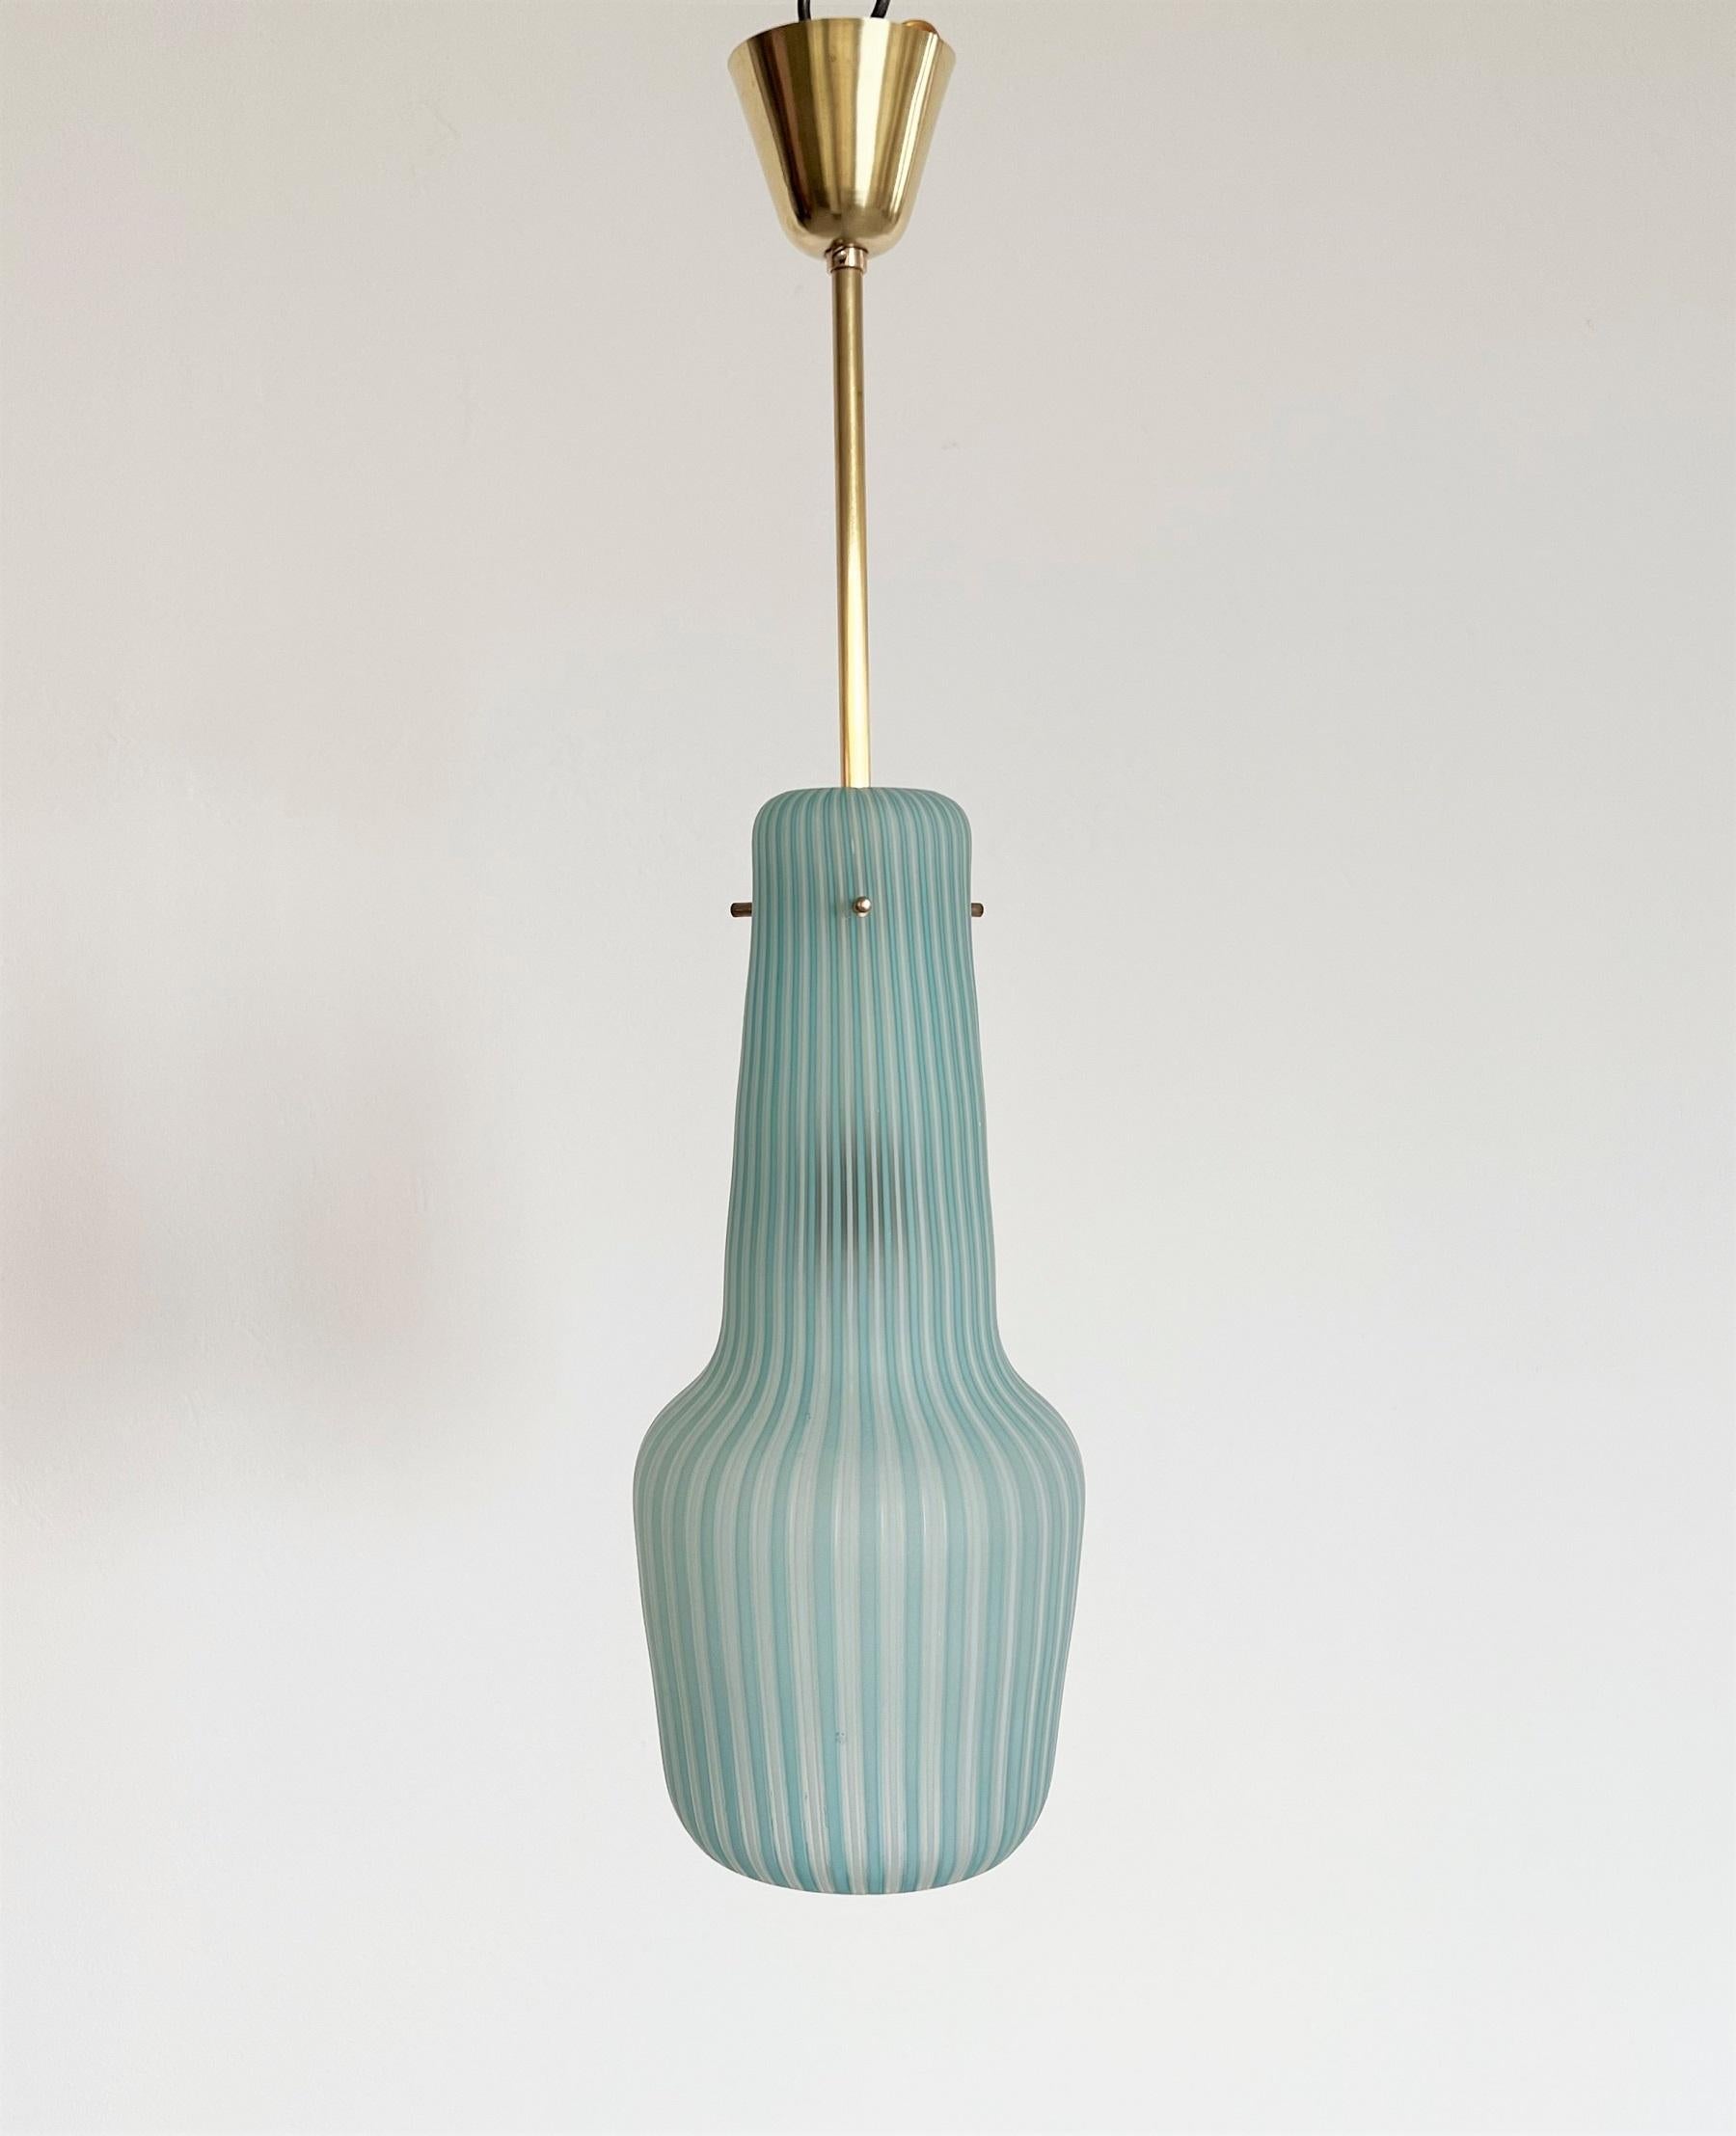 Italian Mid-Century Pendant Lamp in Striped Glass and Brass by Venini, 1960s For Sale 2